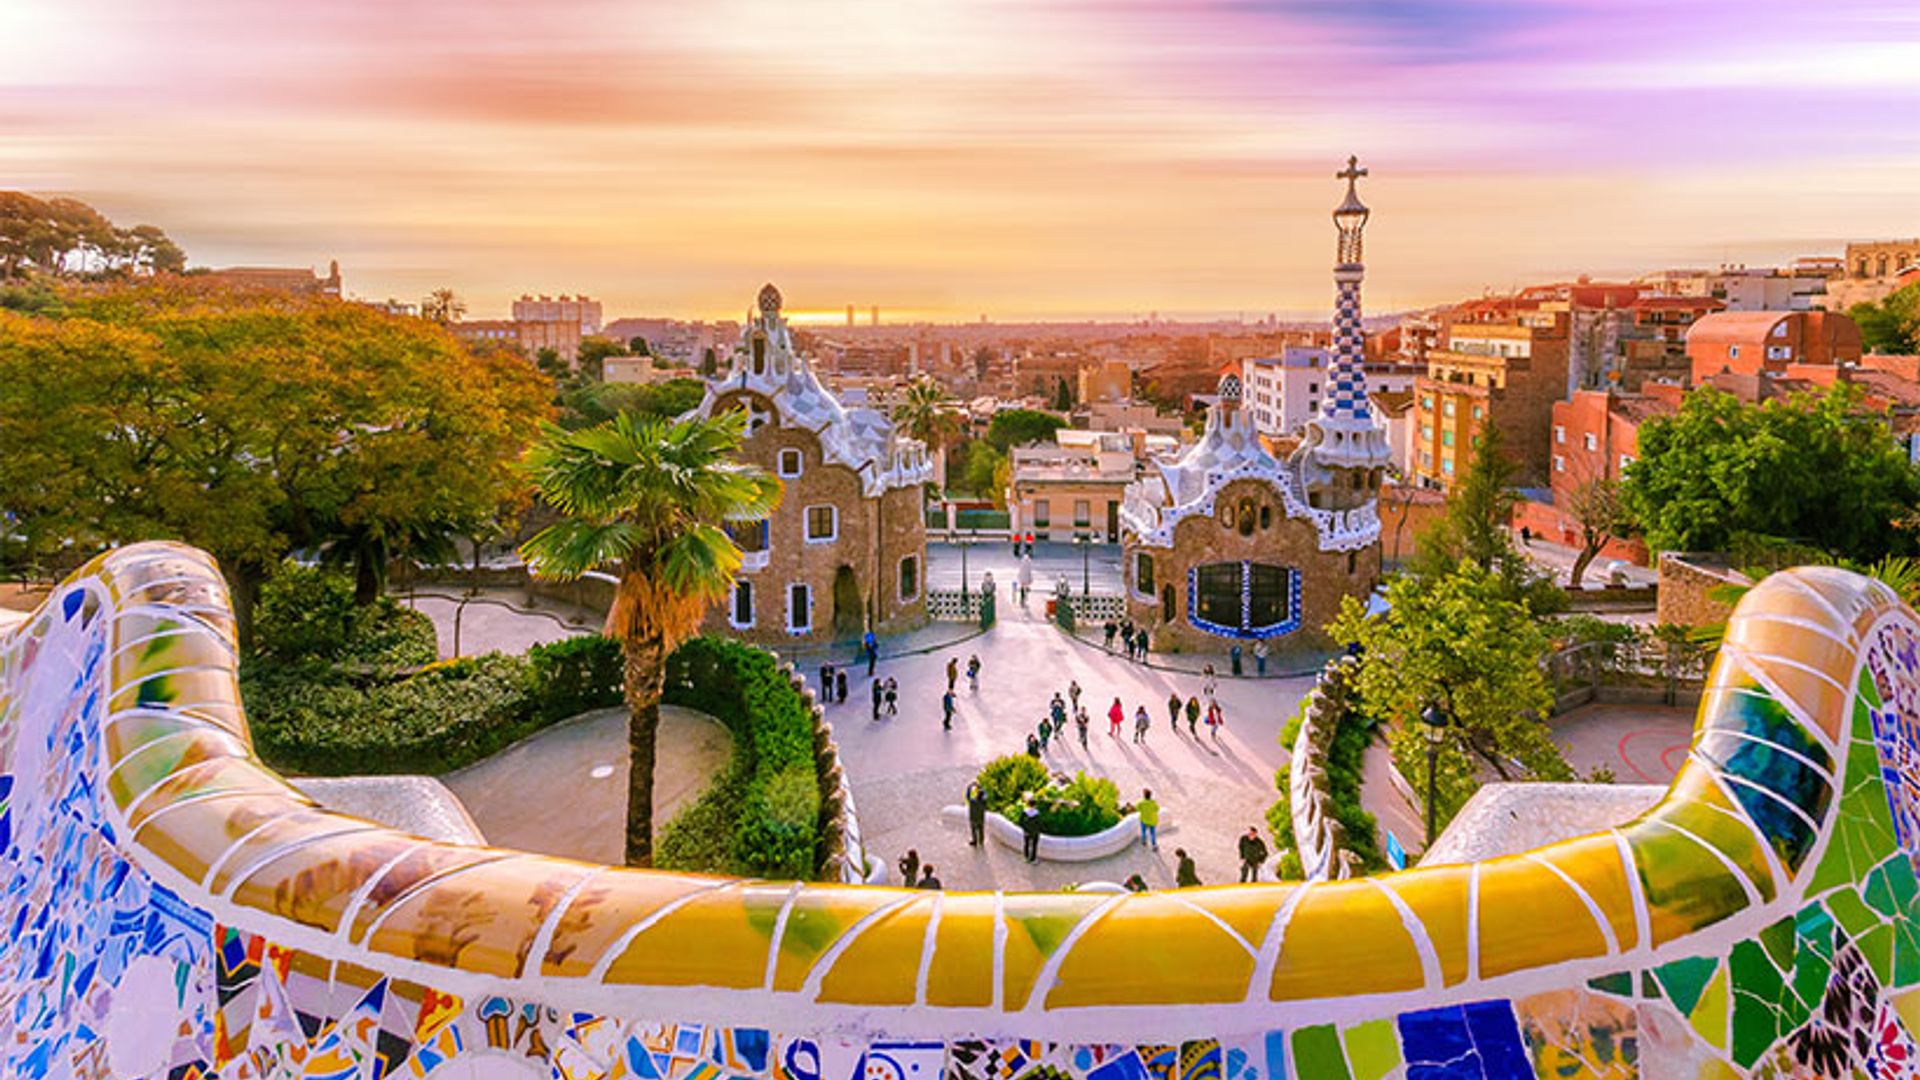 What to do in Barcelona for 3 days: The best things to do in the Capital of Catalonia